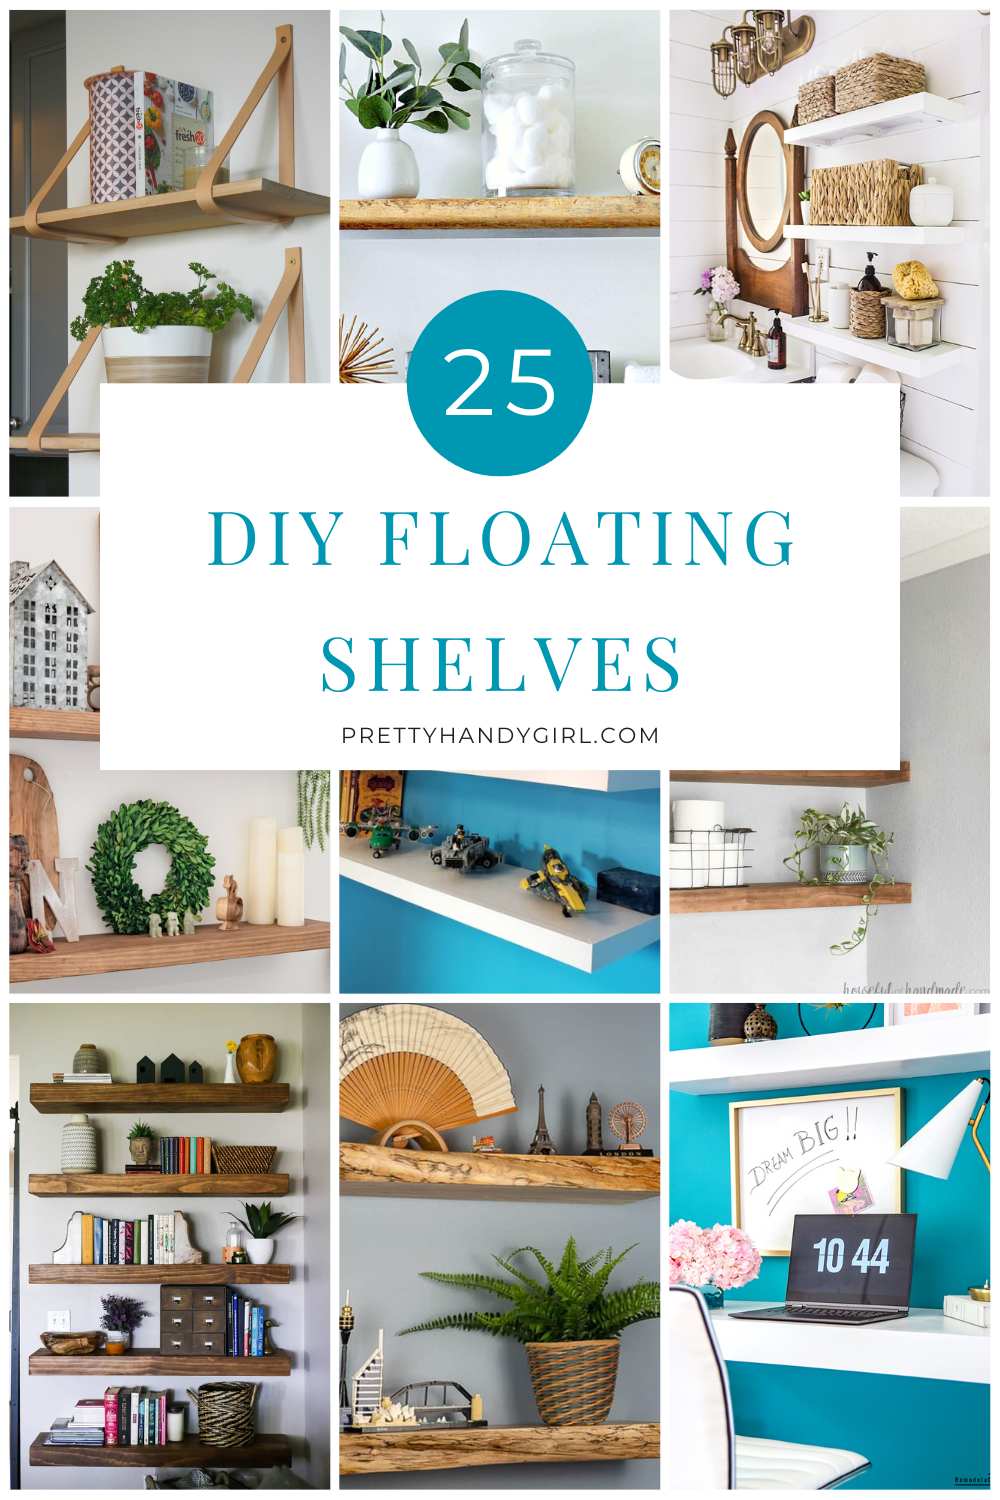 diy floating shelves pin collage with text